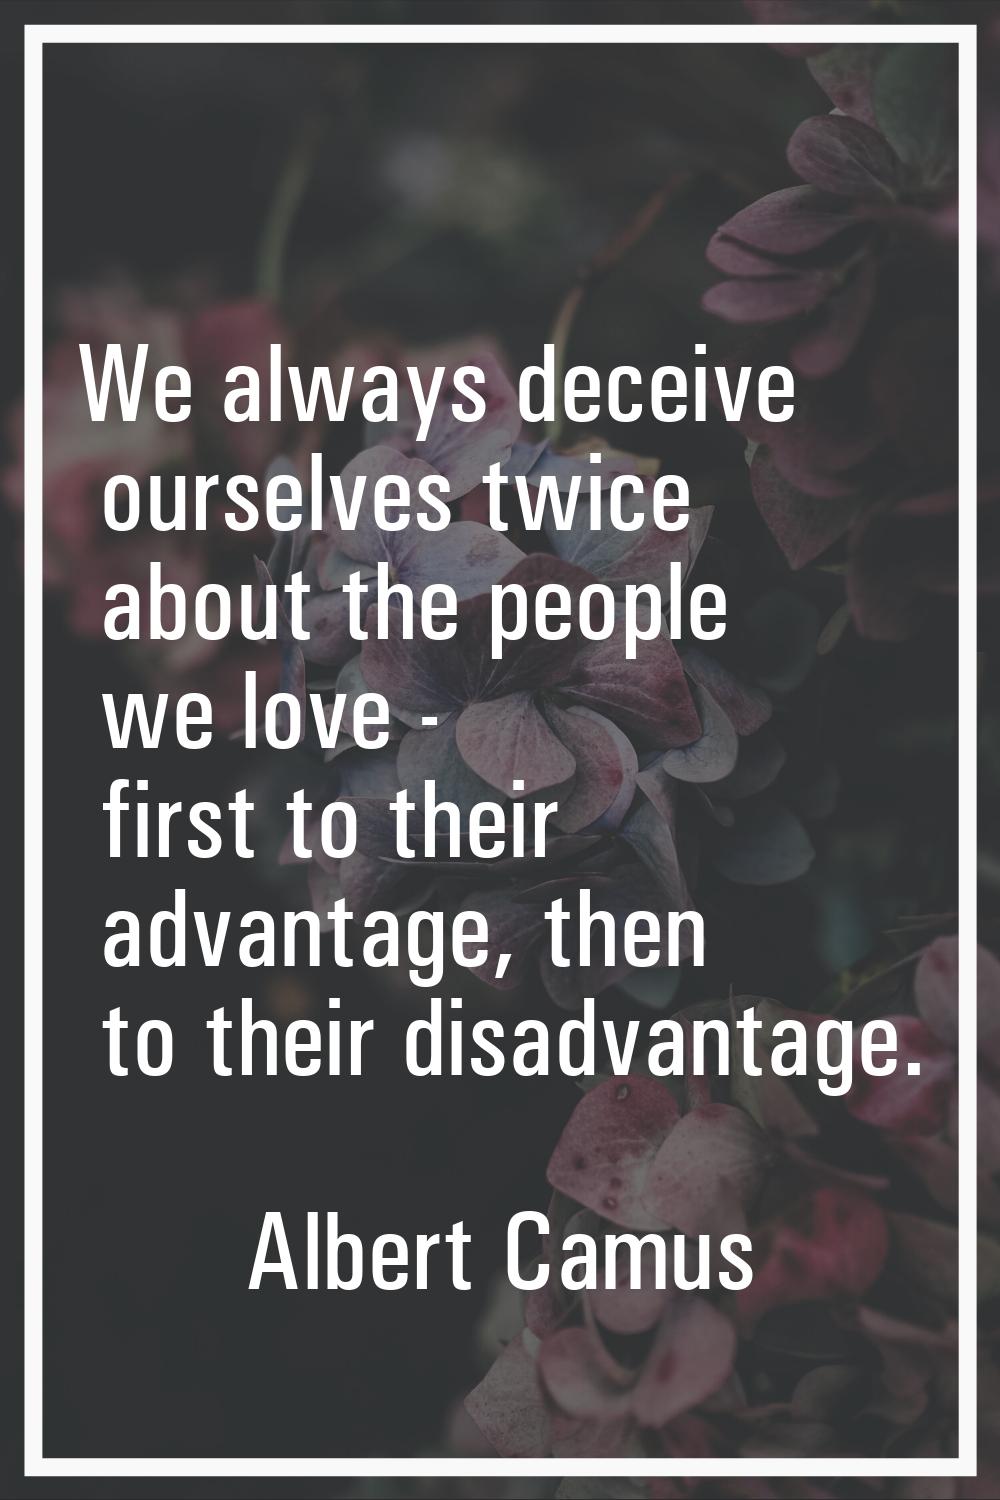 We always deceive ourselves twice about the people we love - first to their advantage, then to thei